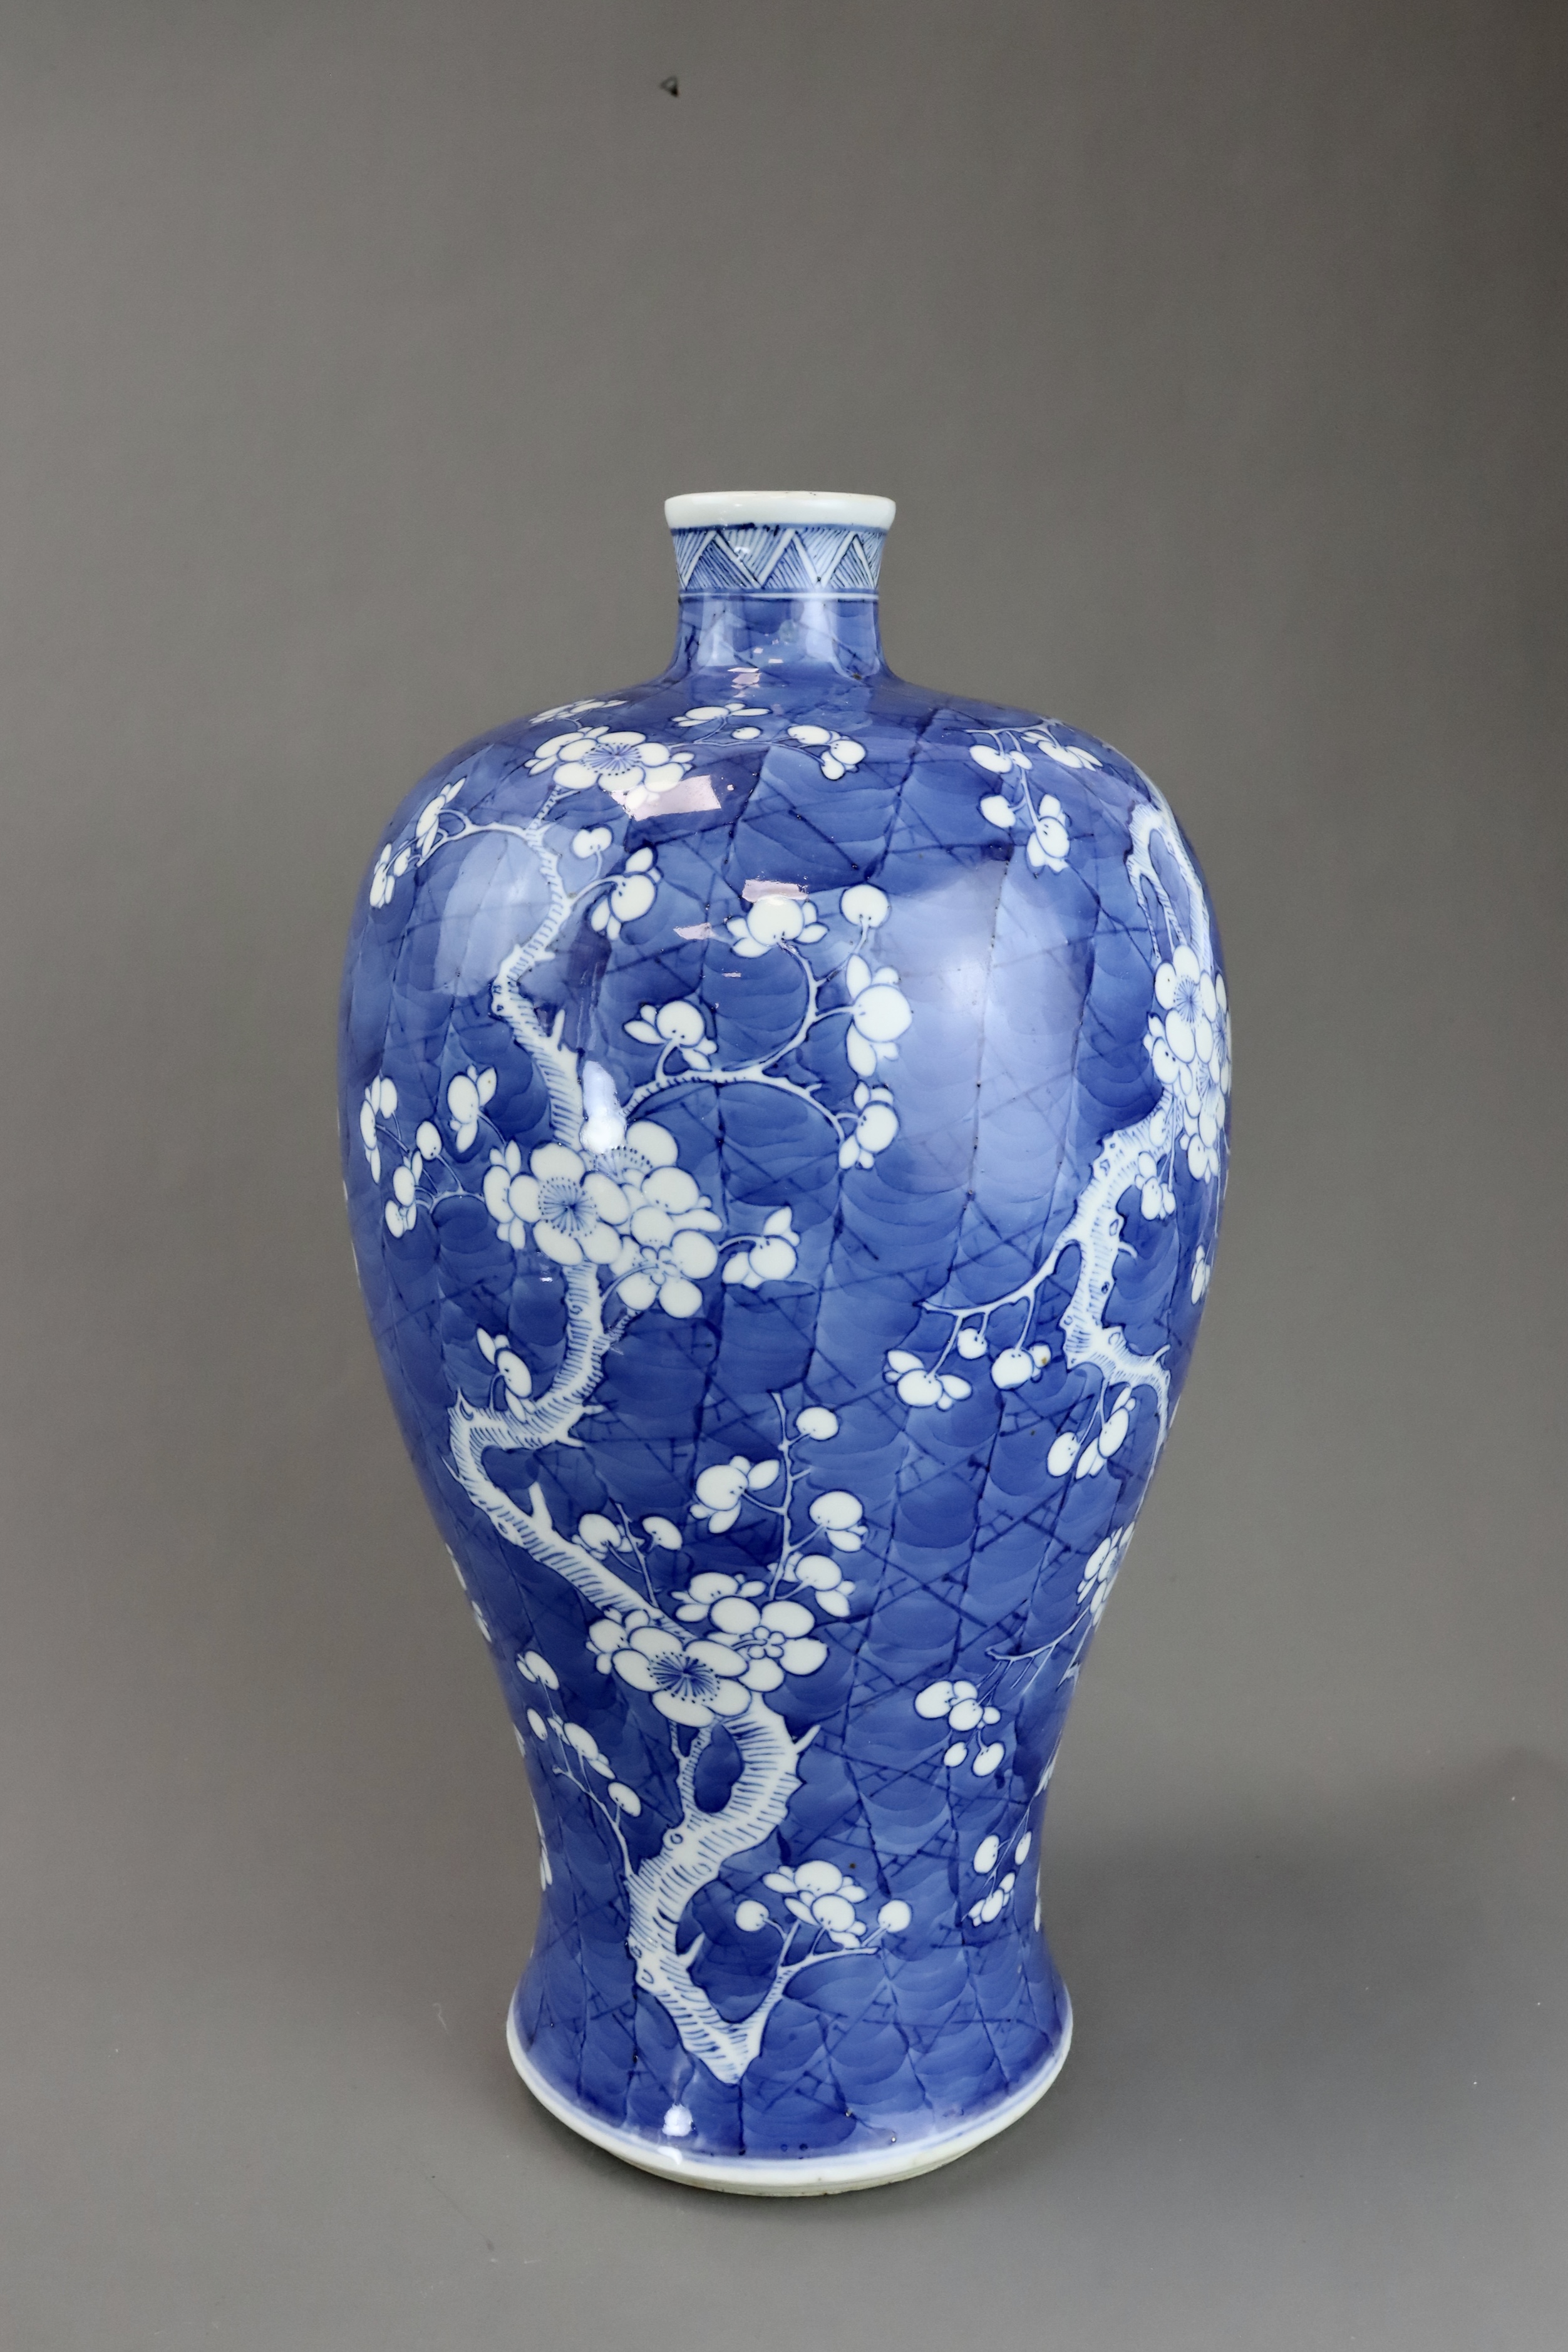 A Blue and White Vase with Prunus, 19th century - Image 3 of 7